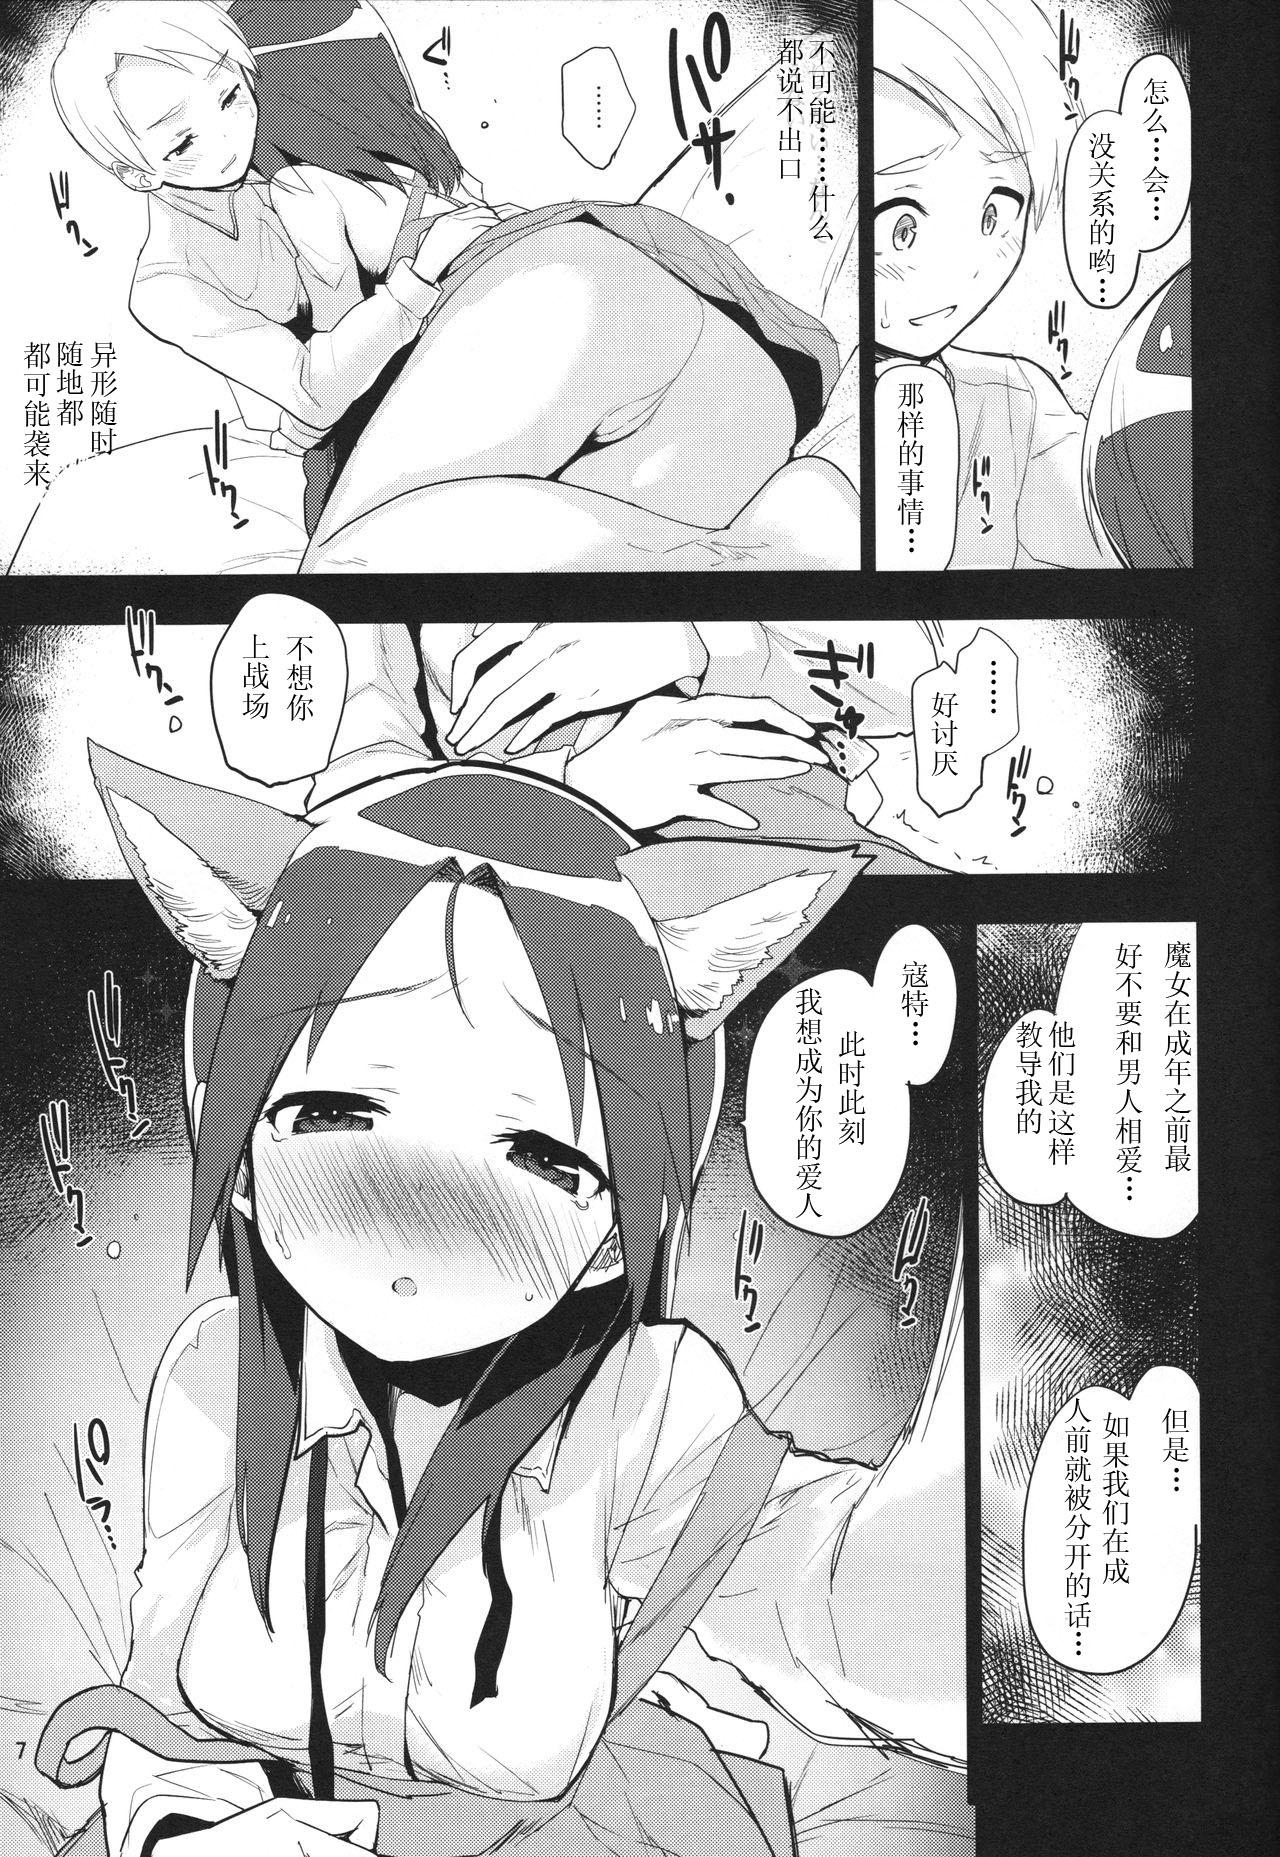 Shorts Korrepetitor | Pianist - Strike witches Exhib - Page 6